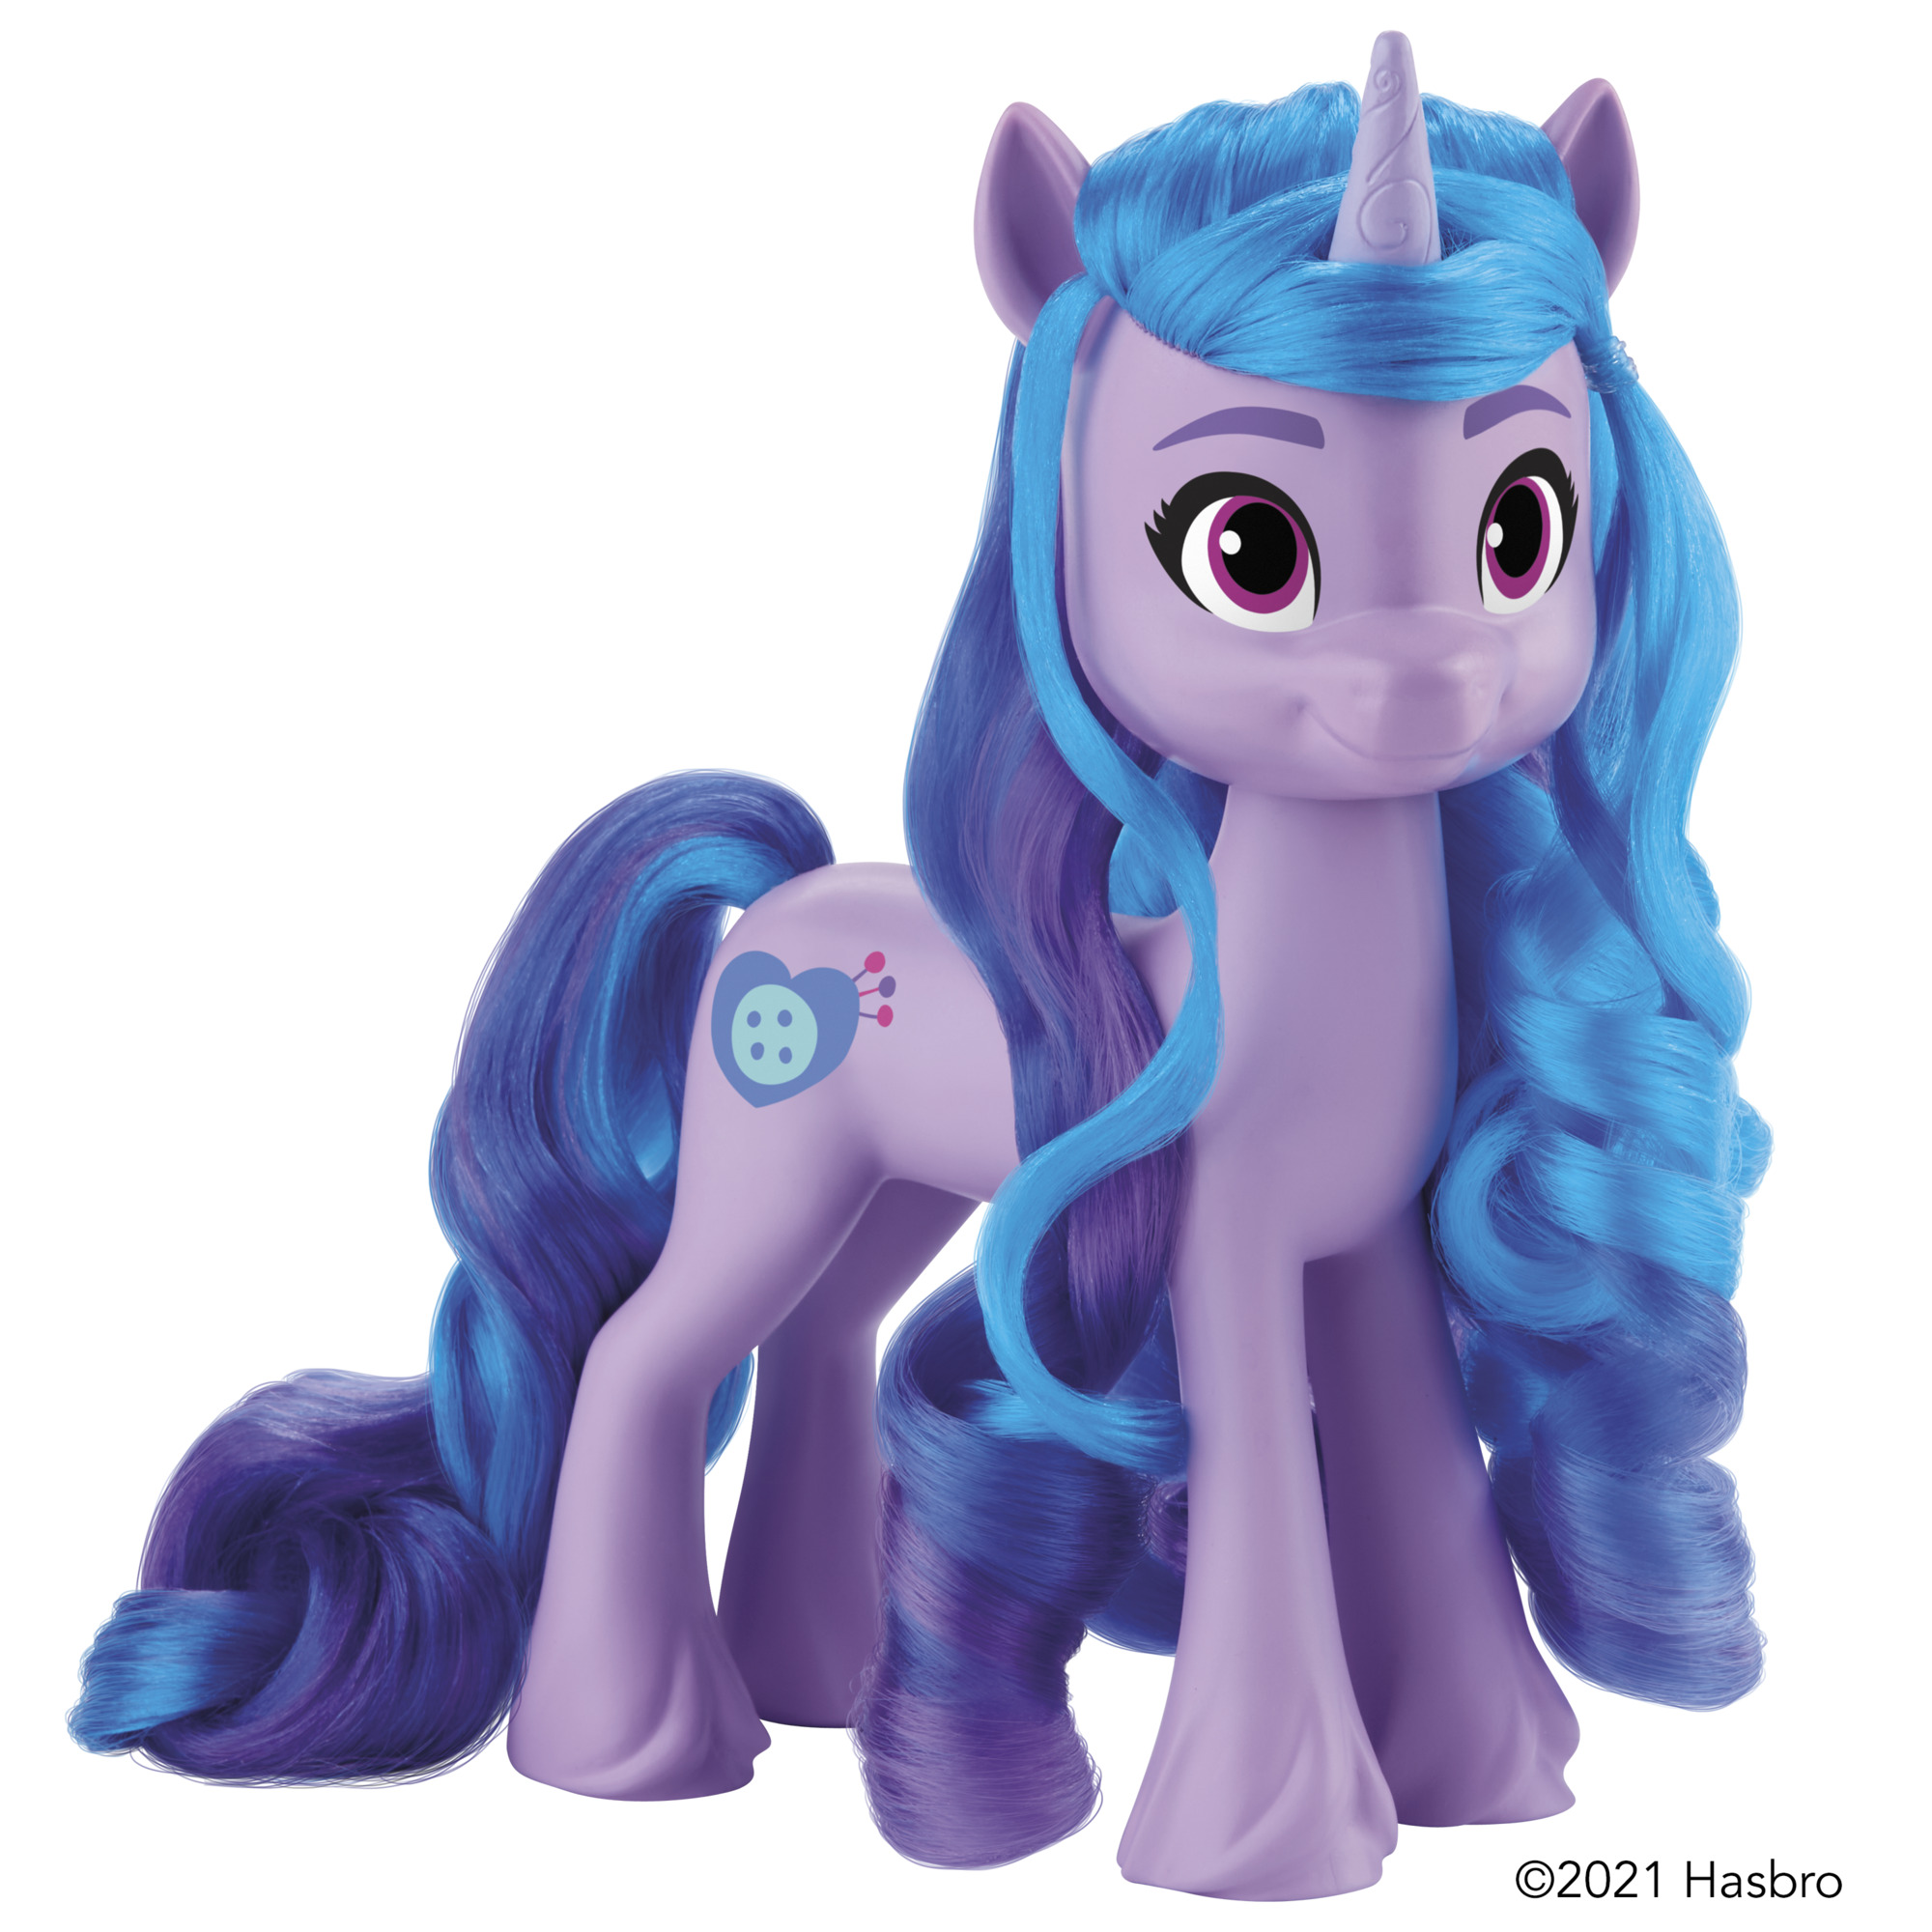 Equestria Daily - MLP Stuff!: Tons of Generation 5 MLP Merchandise